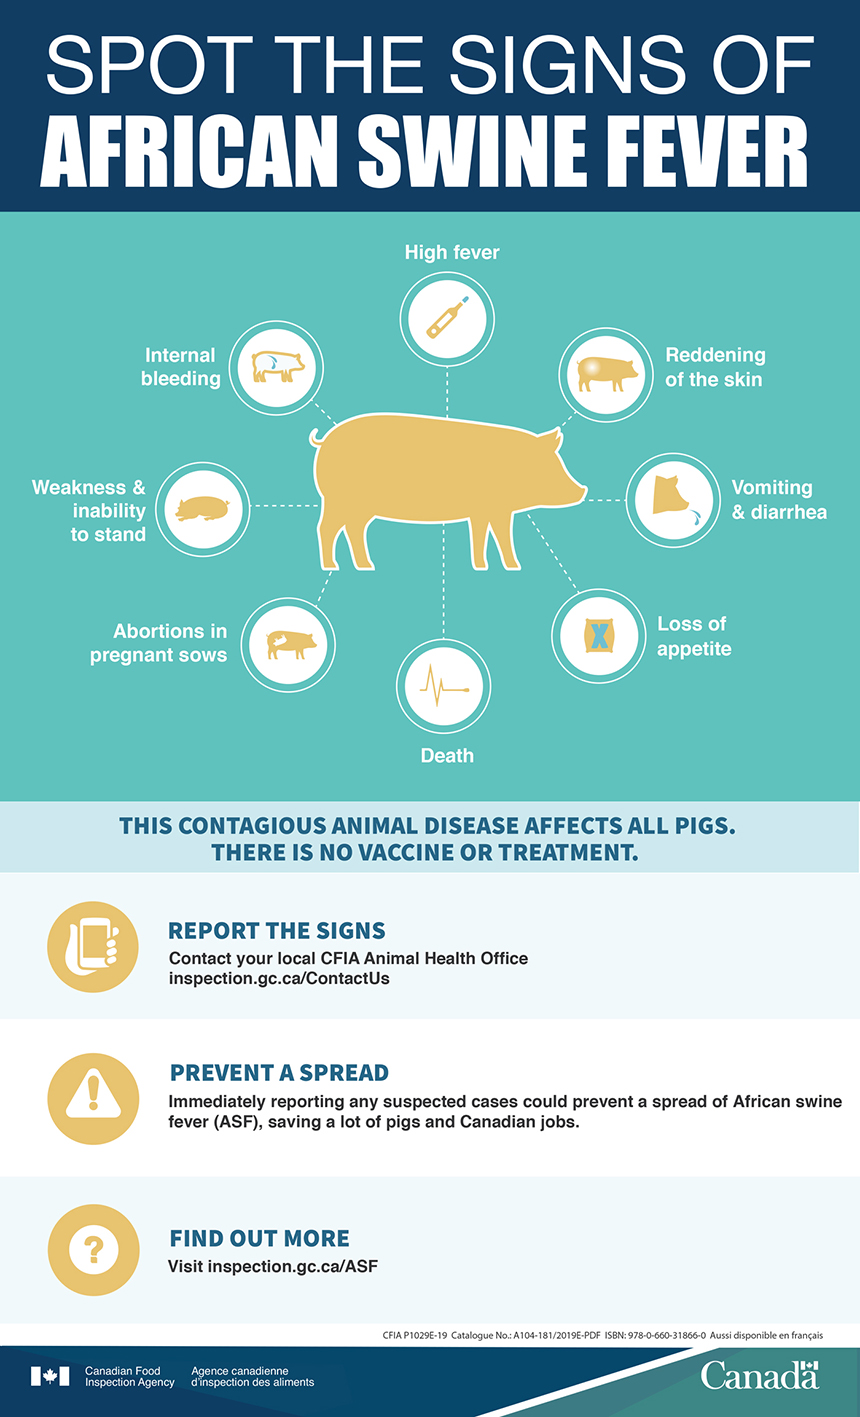 Spot the signs of African swine fever (ASF). Description follows.